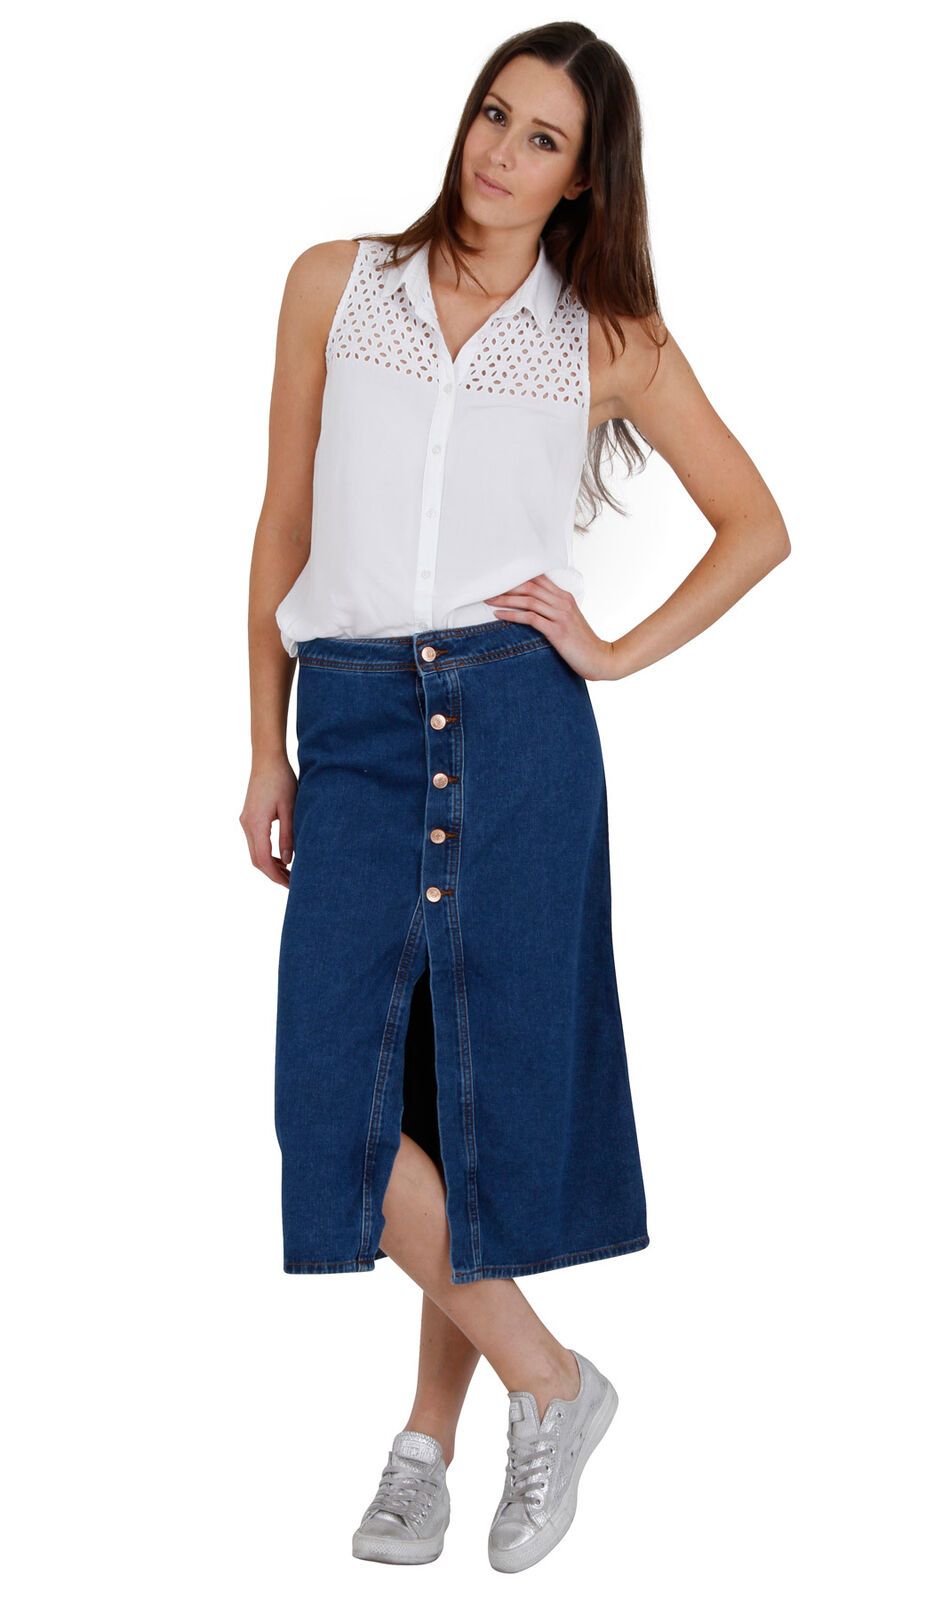 Full frontal pose with hand on left hip of button front mid wash calf-length denim skirt from Dungarees Online.